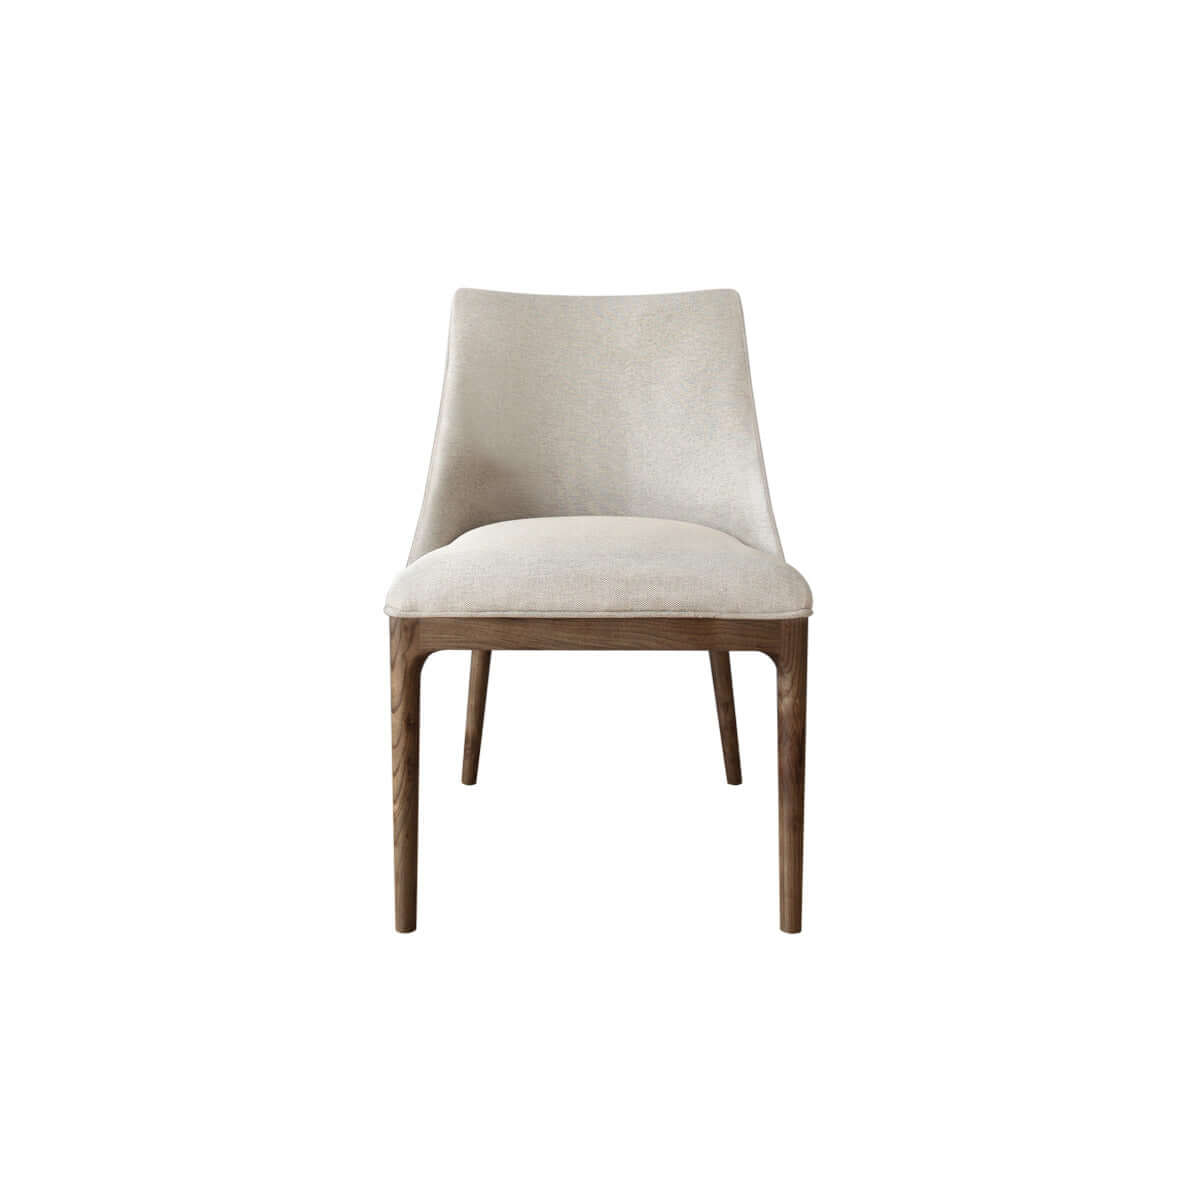 contemporary dining chair with straight wooden legs and a low backrest